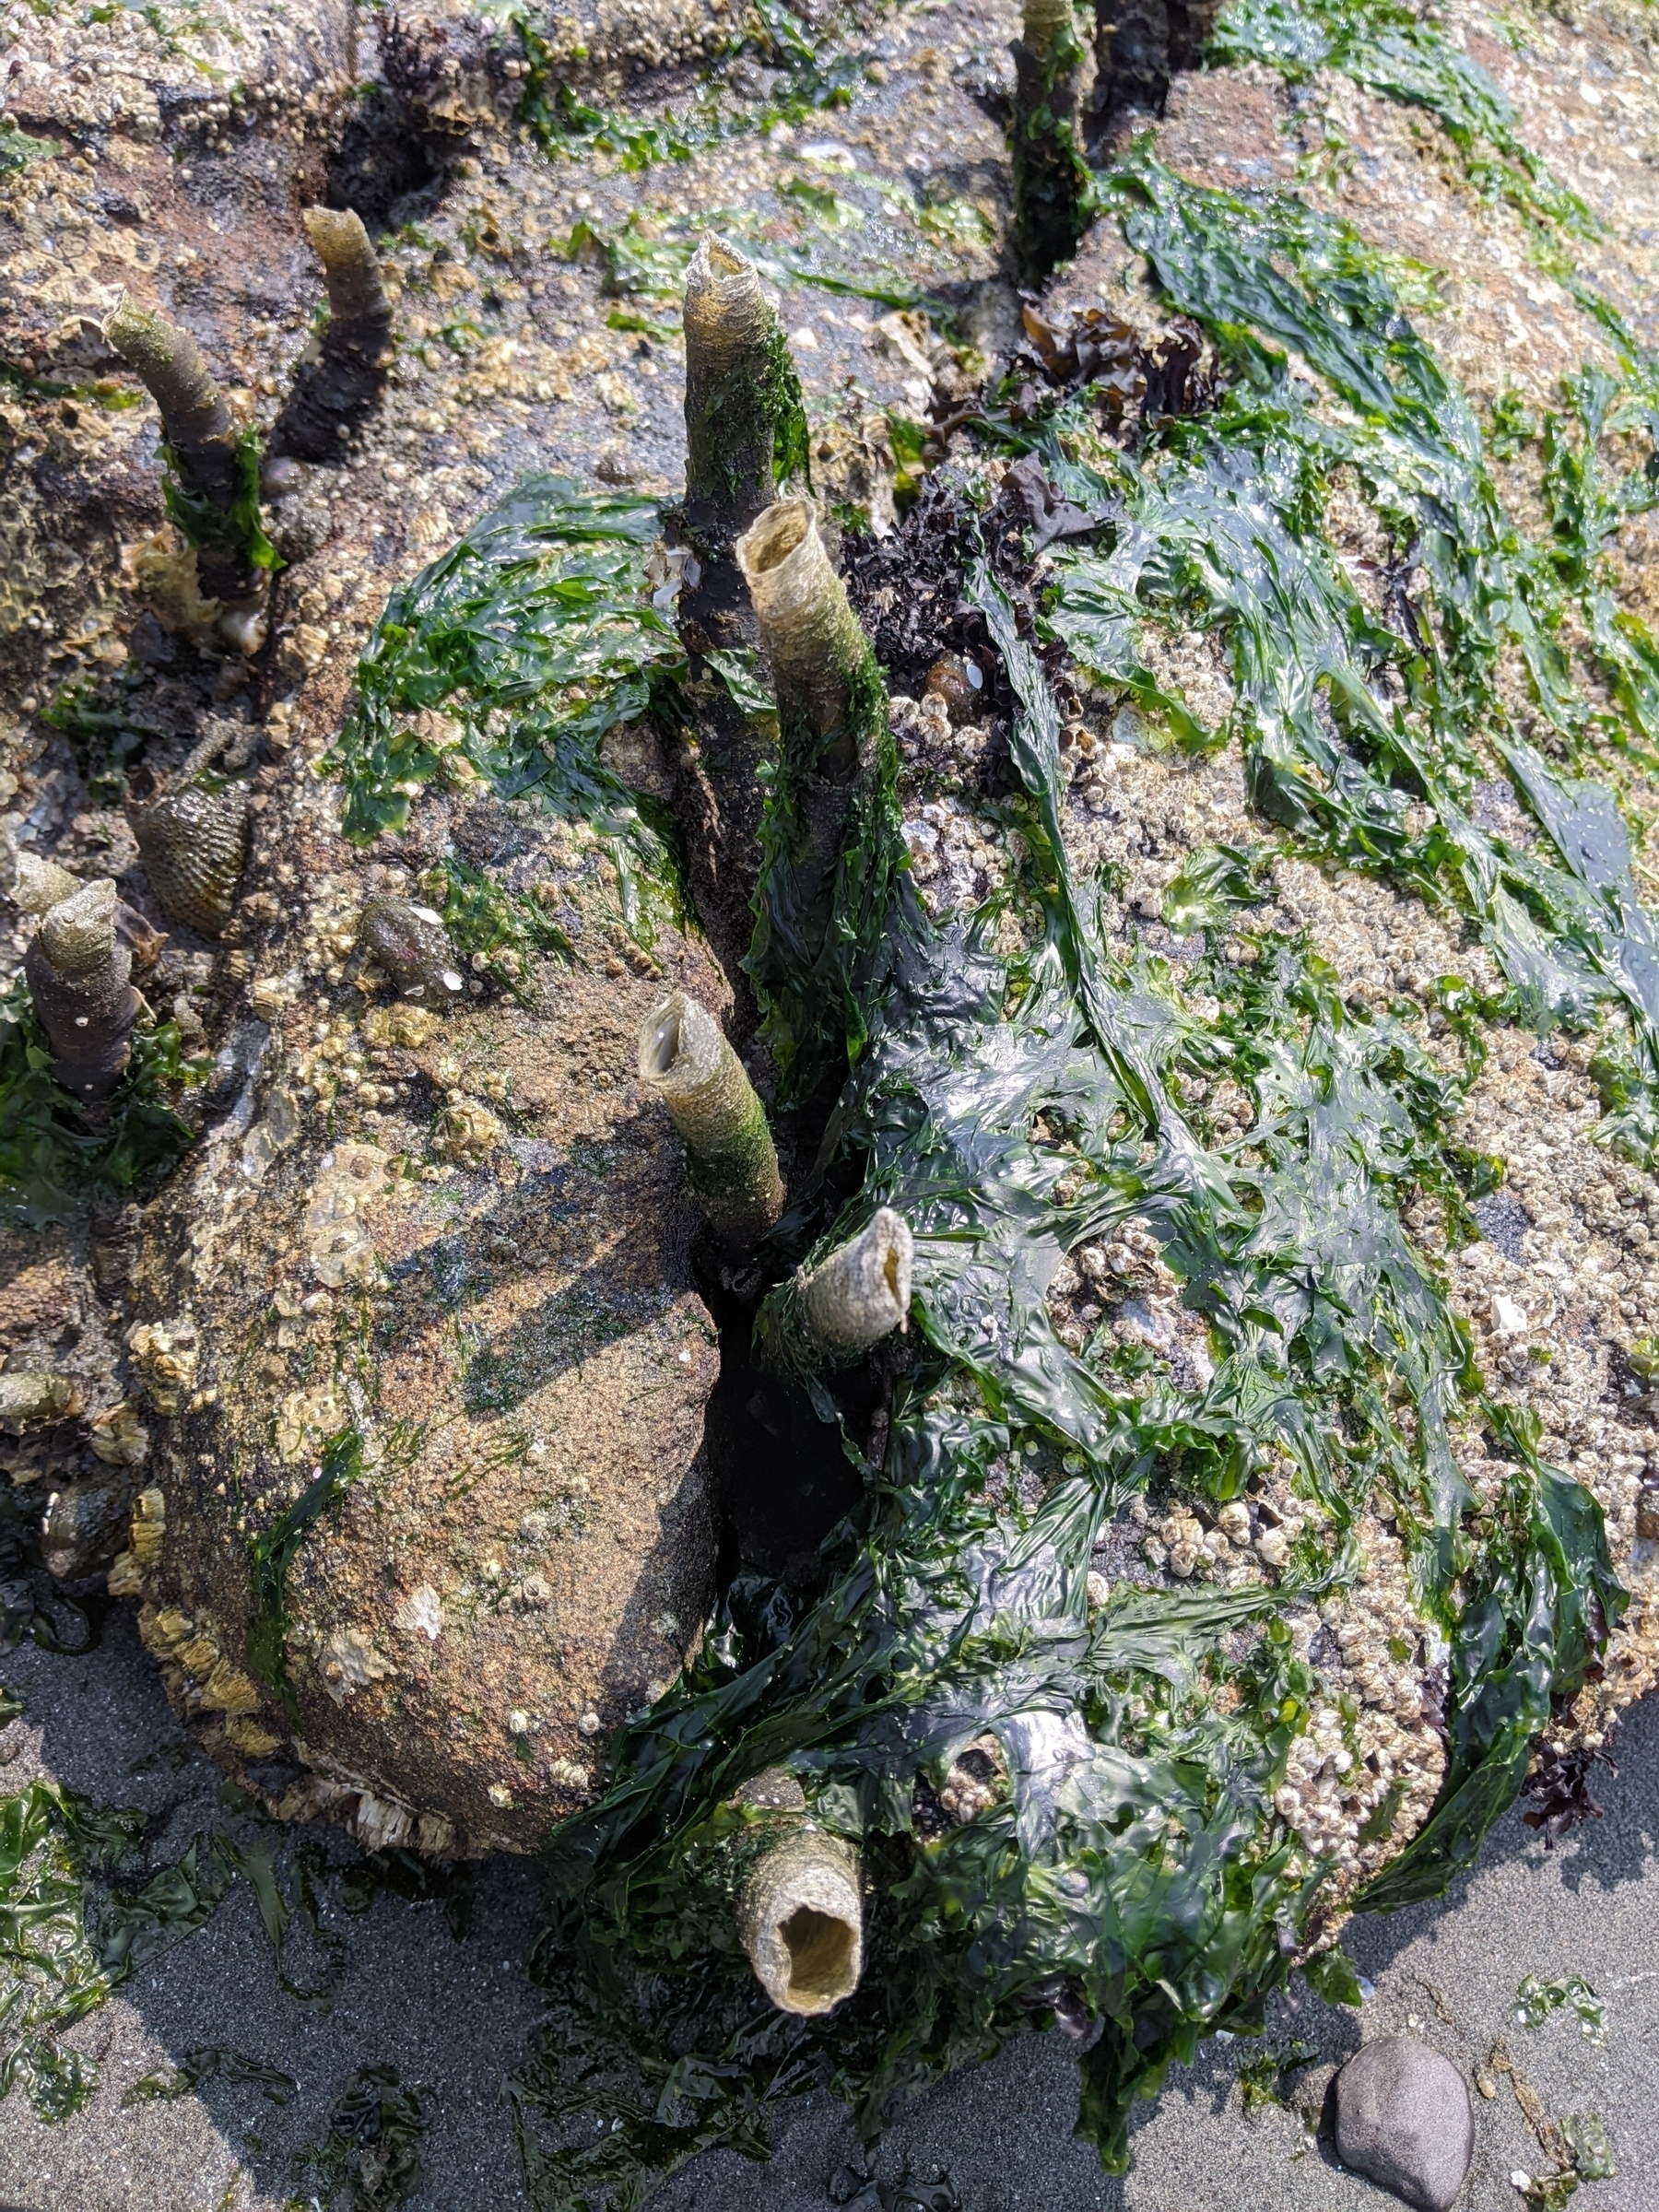 tubeworm shells (?) stick up out of a crack between barnacle crusted, seaweed draped rocks 